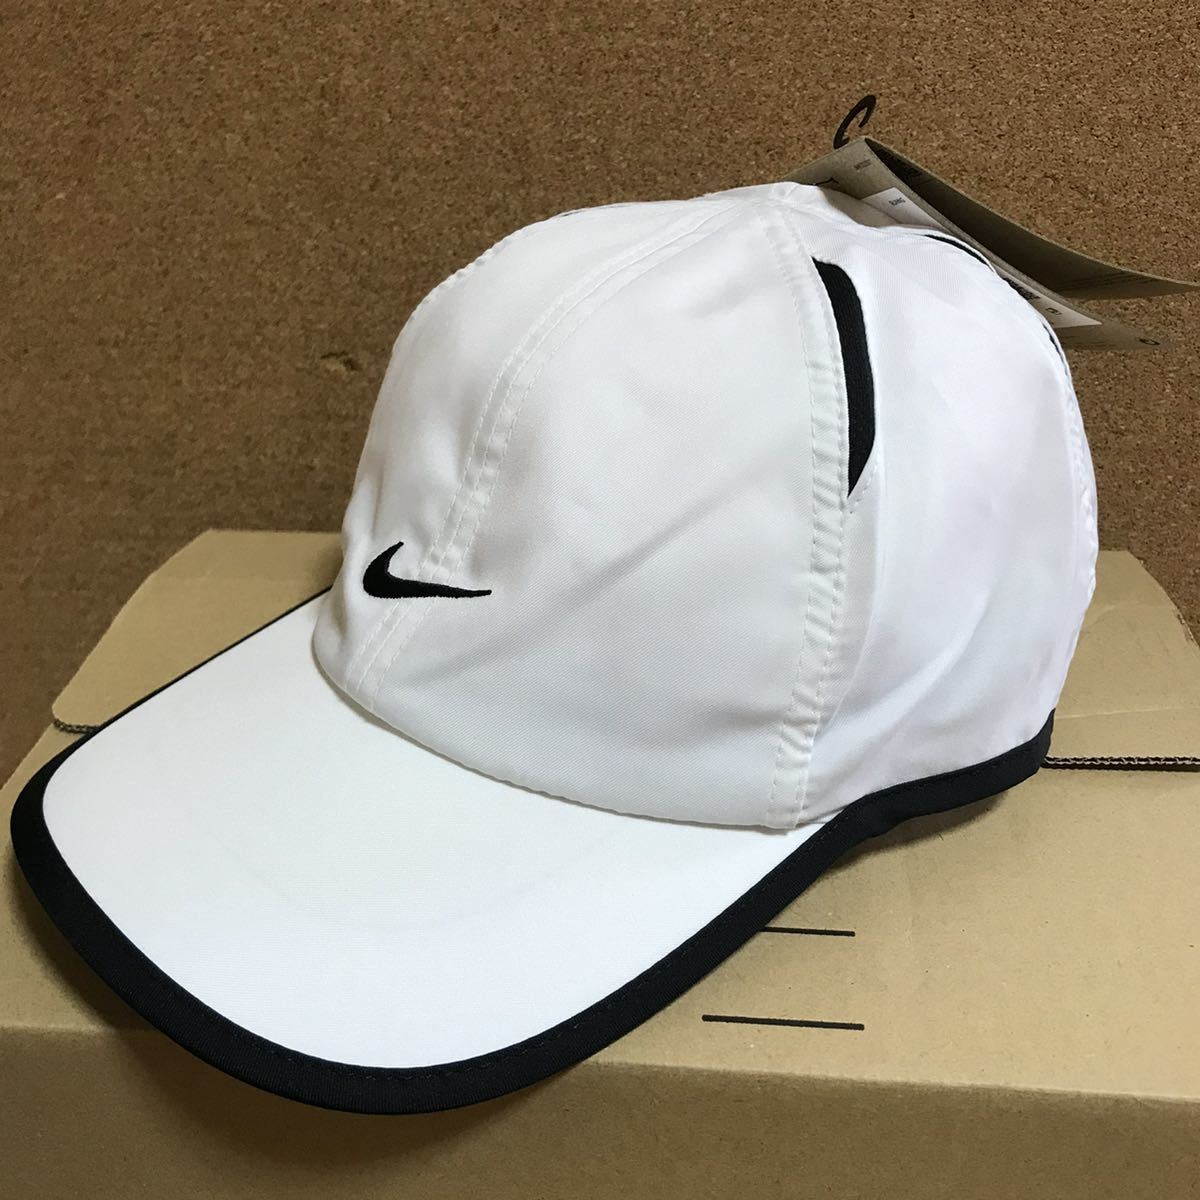 NIKE Nike running cap hat feather light white 57-59cm postage included 